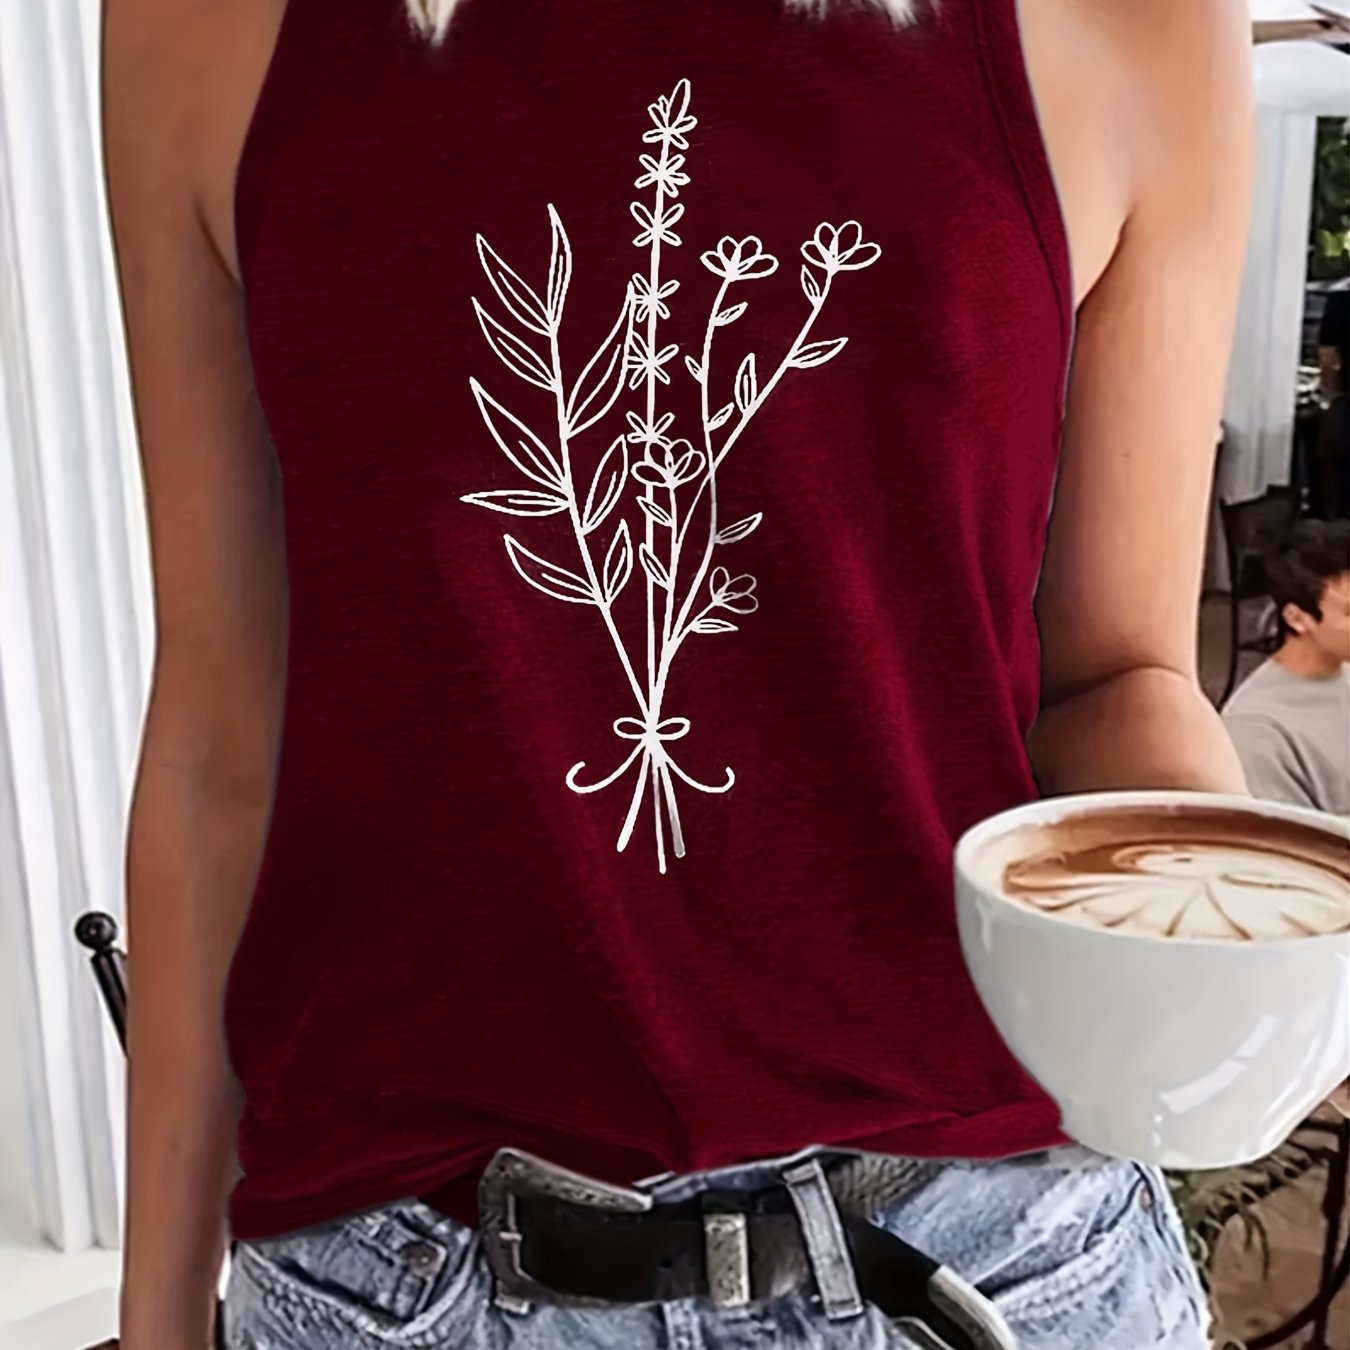 「lovevop」Floral Print Round Neck Tank Top, Casual Loose Fashion Sleeveless Vest Tank Top, Women's Clothing